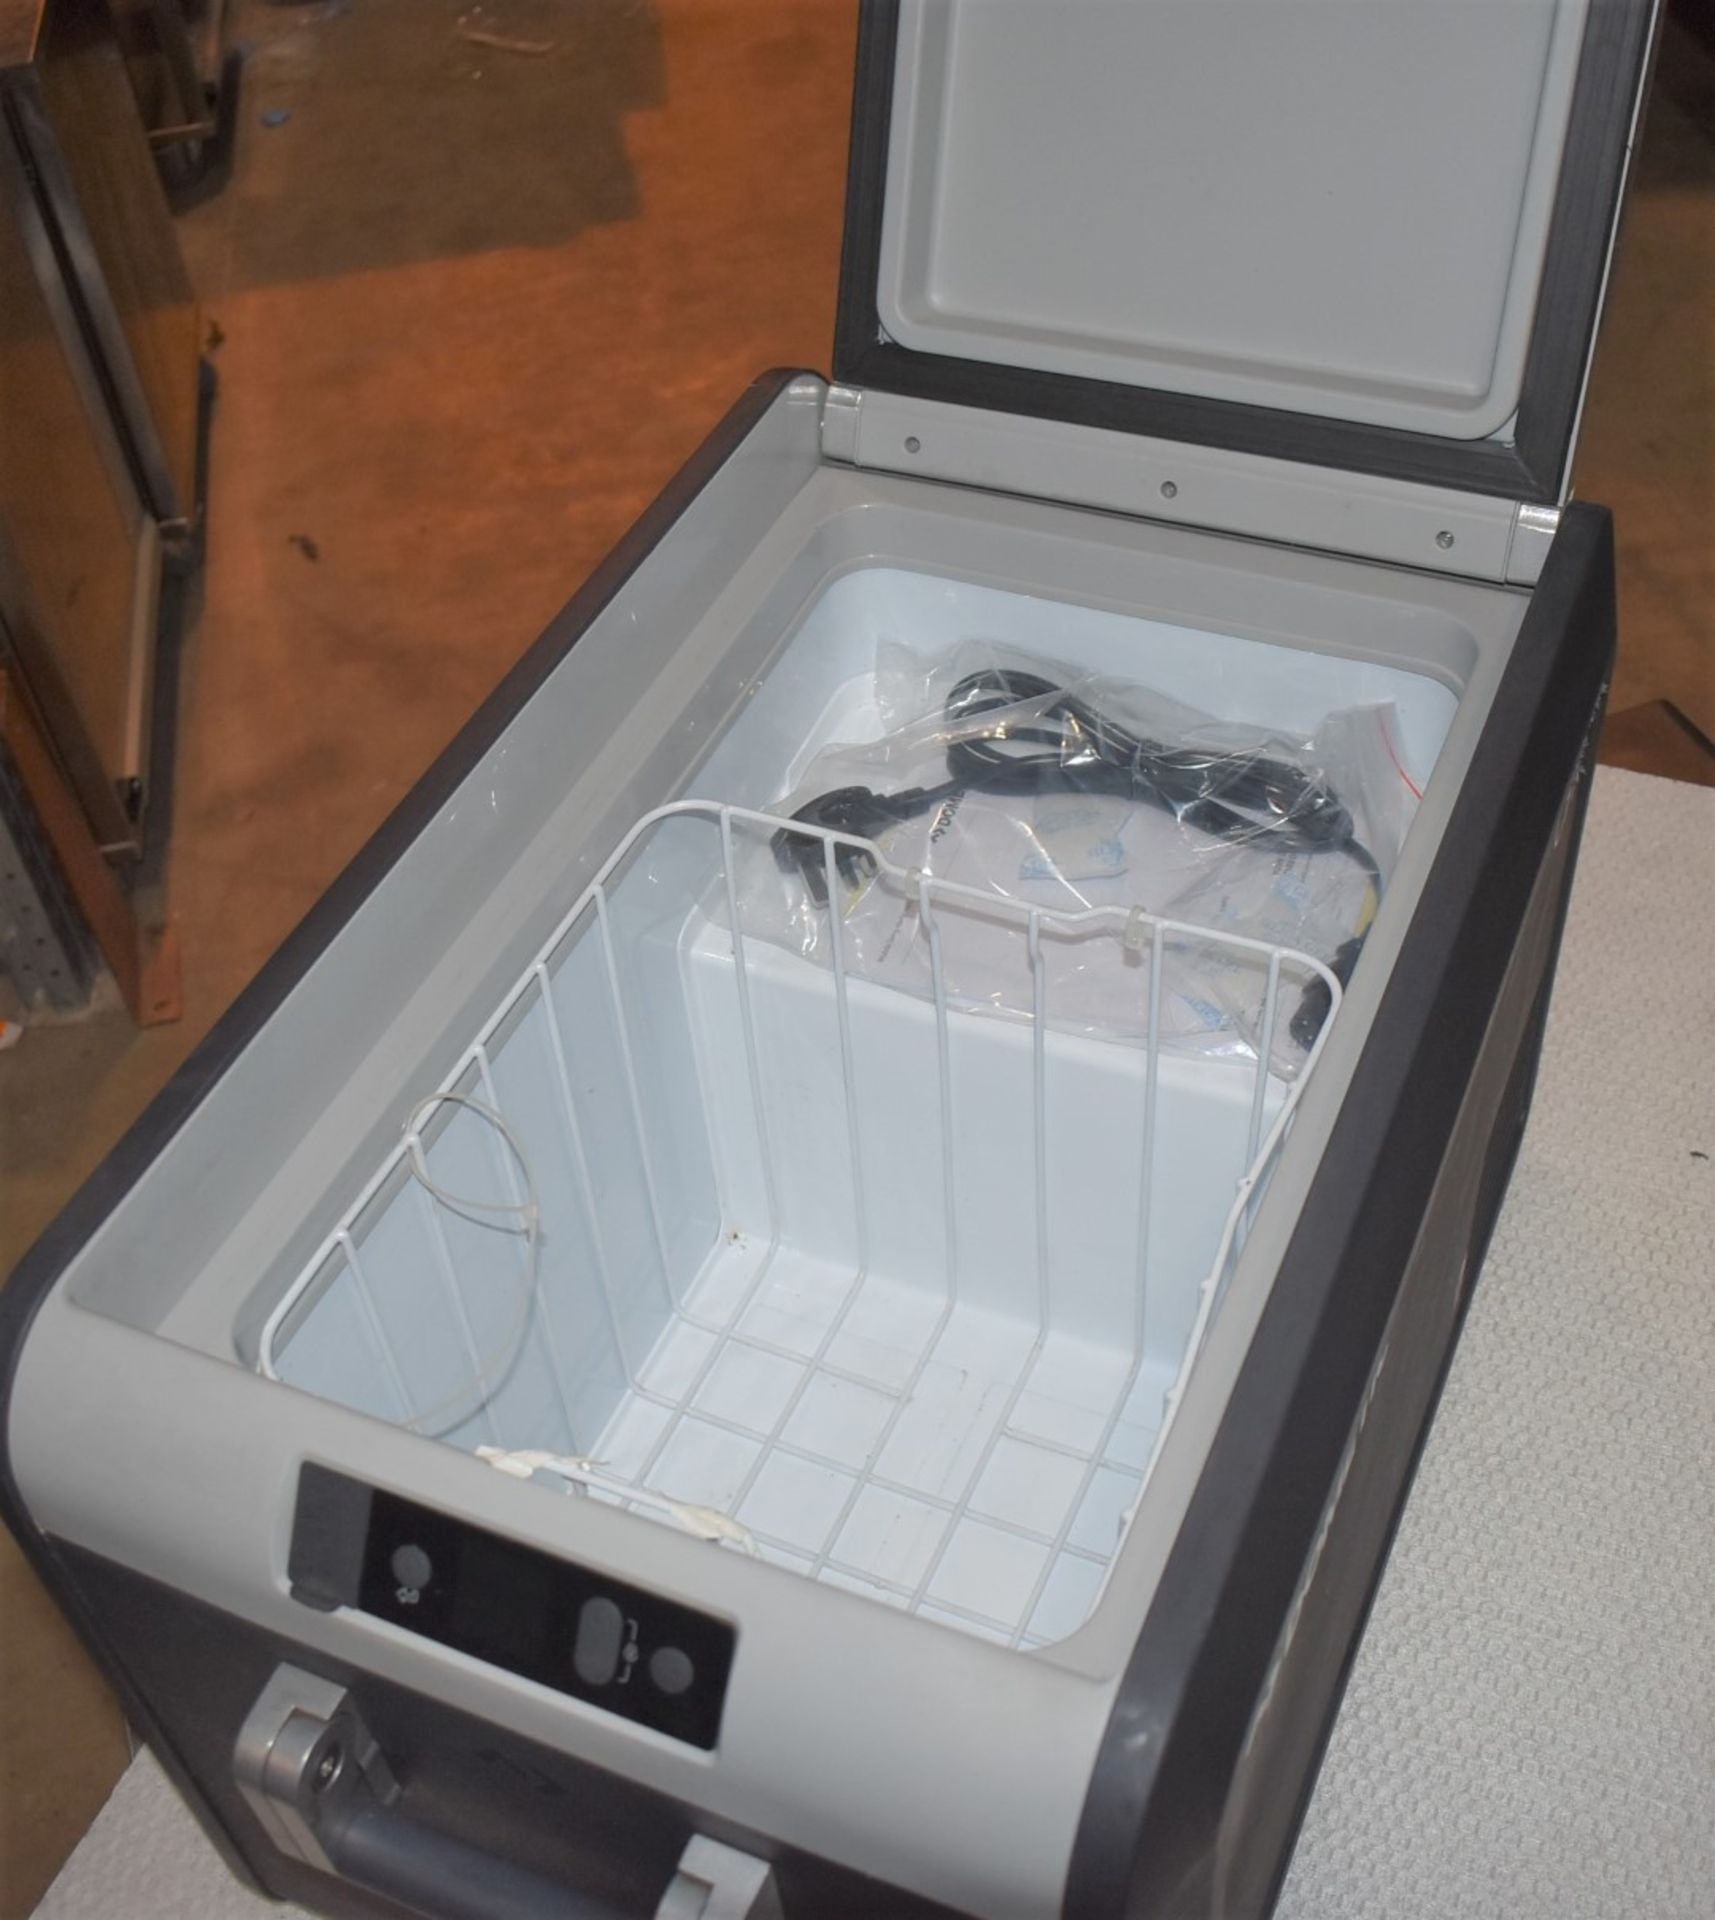 1 x Dometic CFX3 35 Portable 32l Compressor Cooler and Freezer - Perfect For Cooling The Christmas - Image 8 of 10